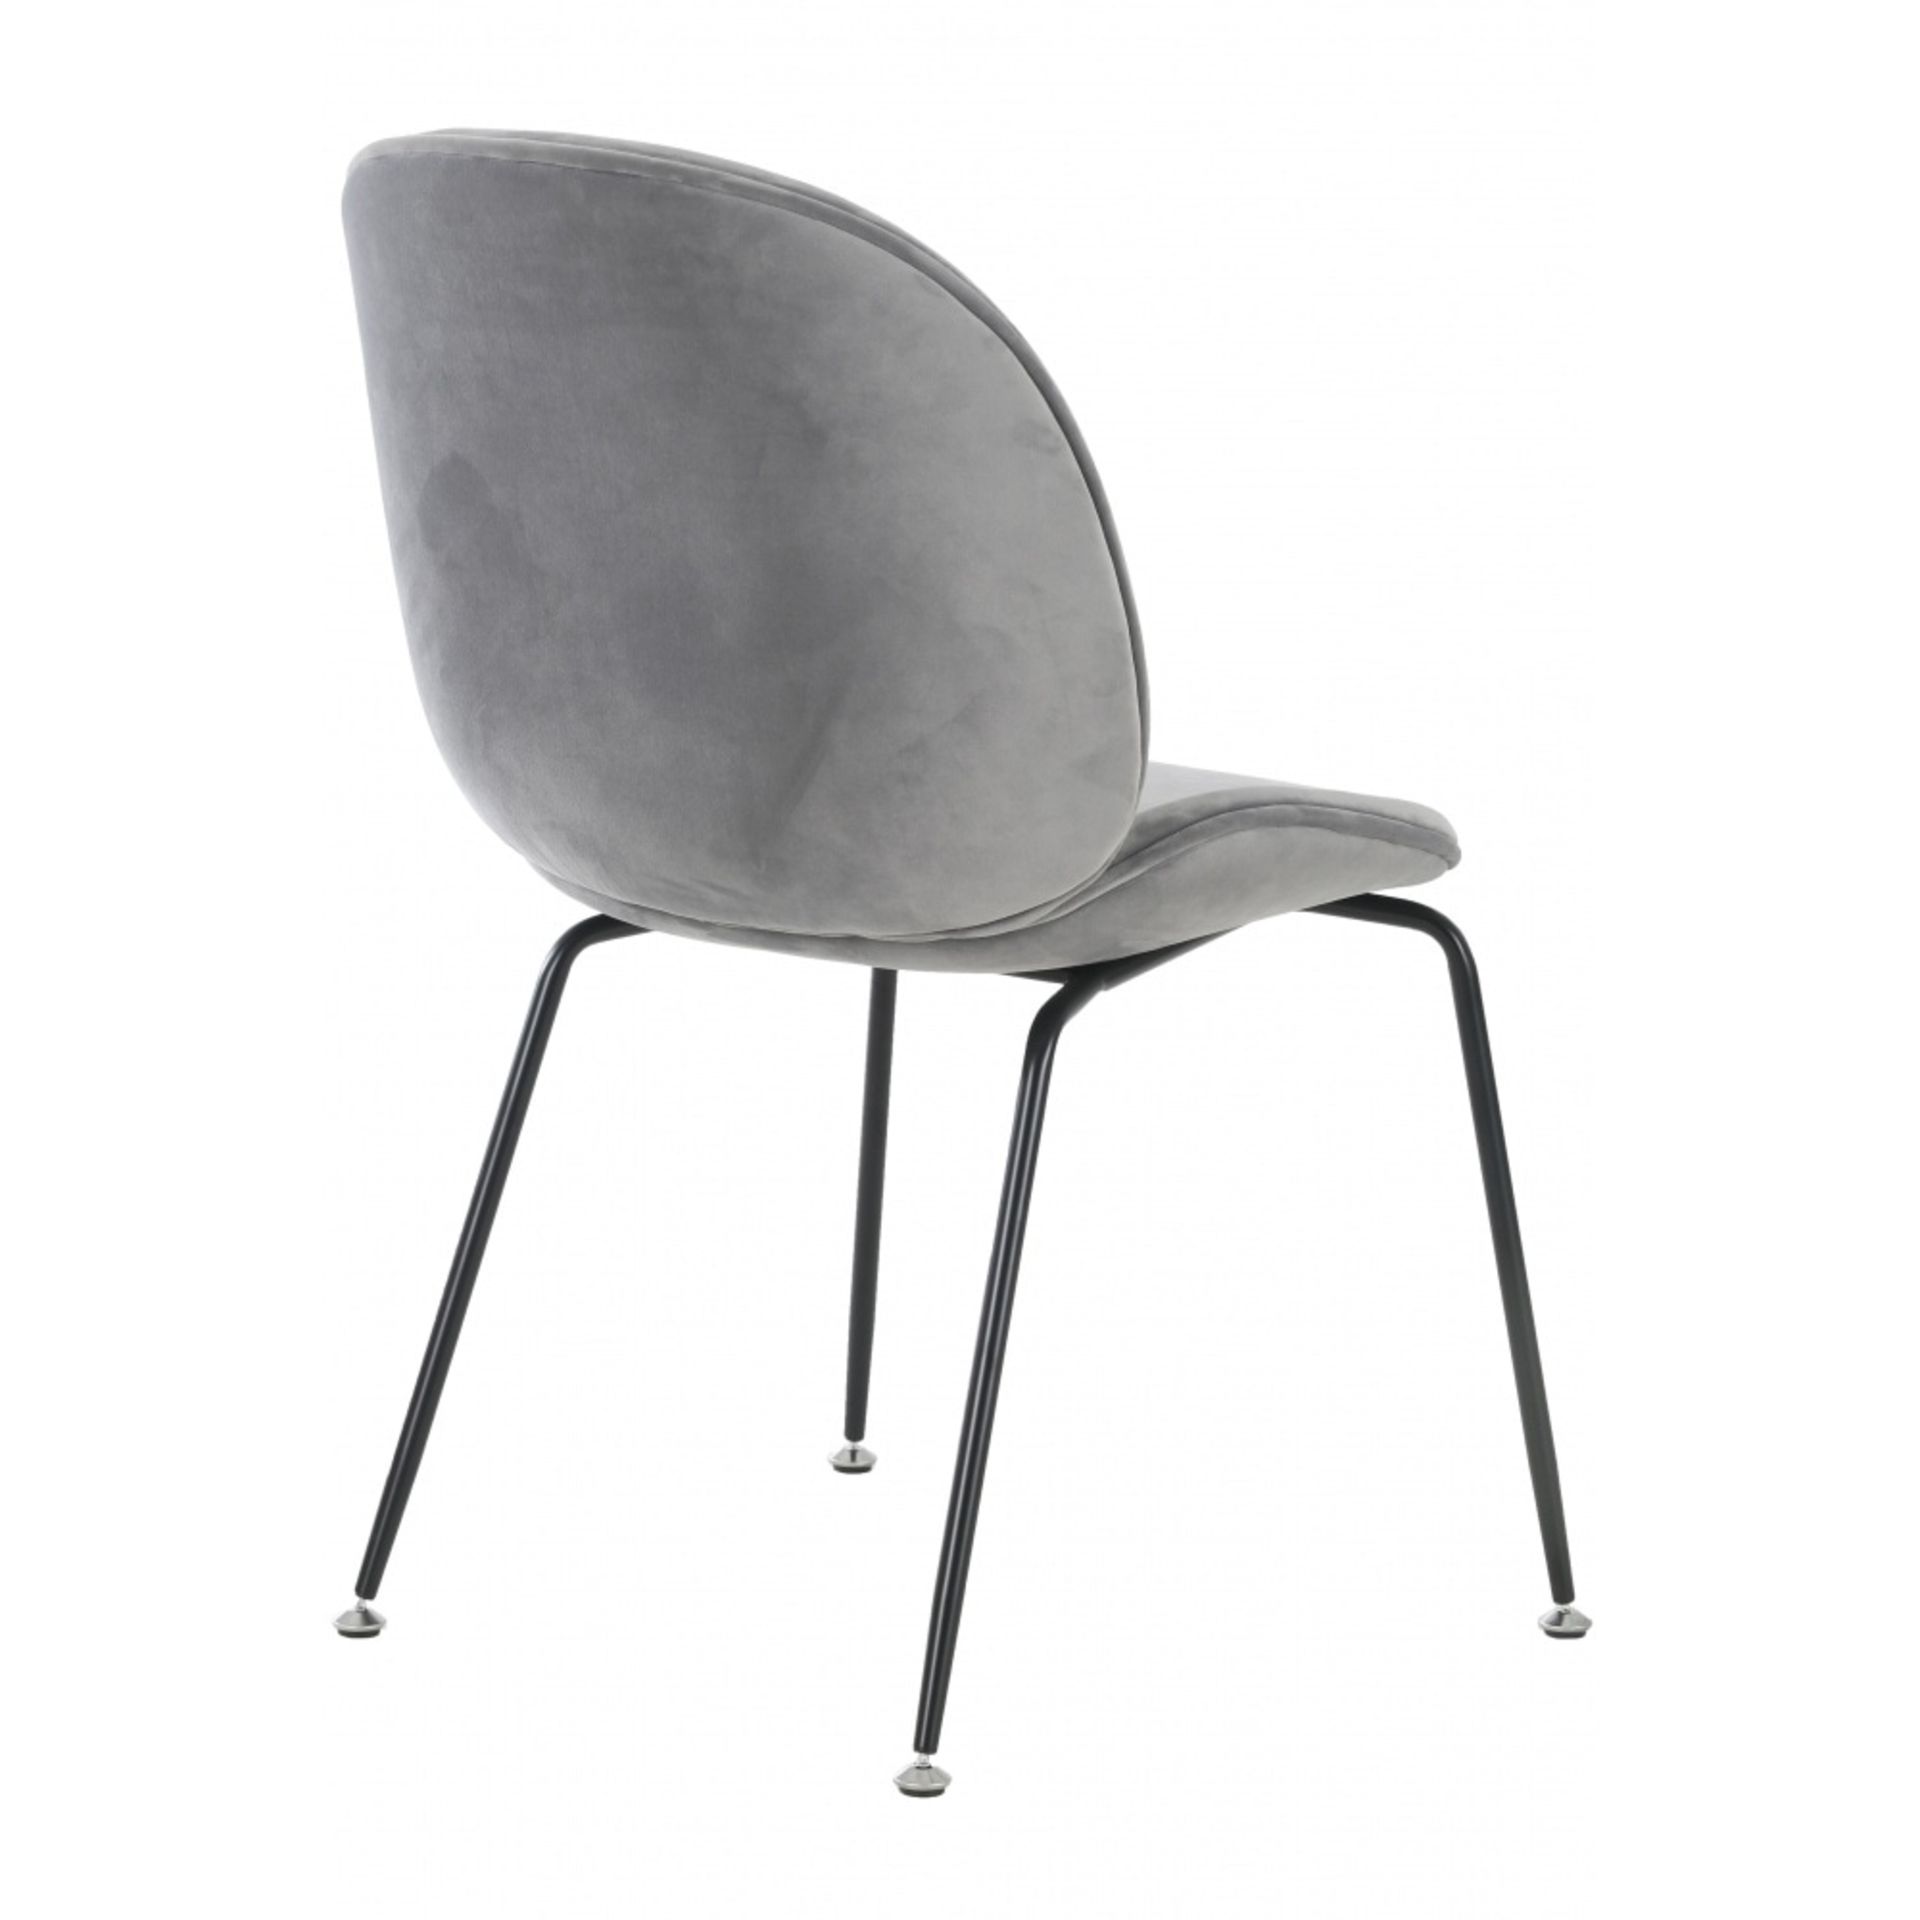 2 x Grace Upholstered Contemporary Dining Chairs in Grey Velvet - New - Image 4 of 6